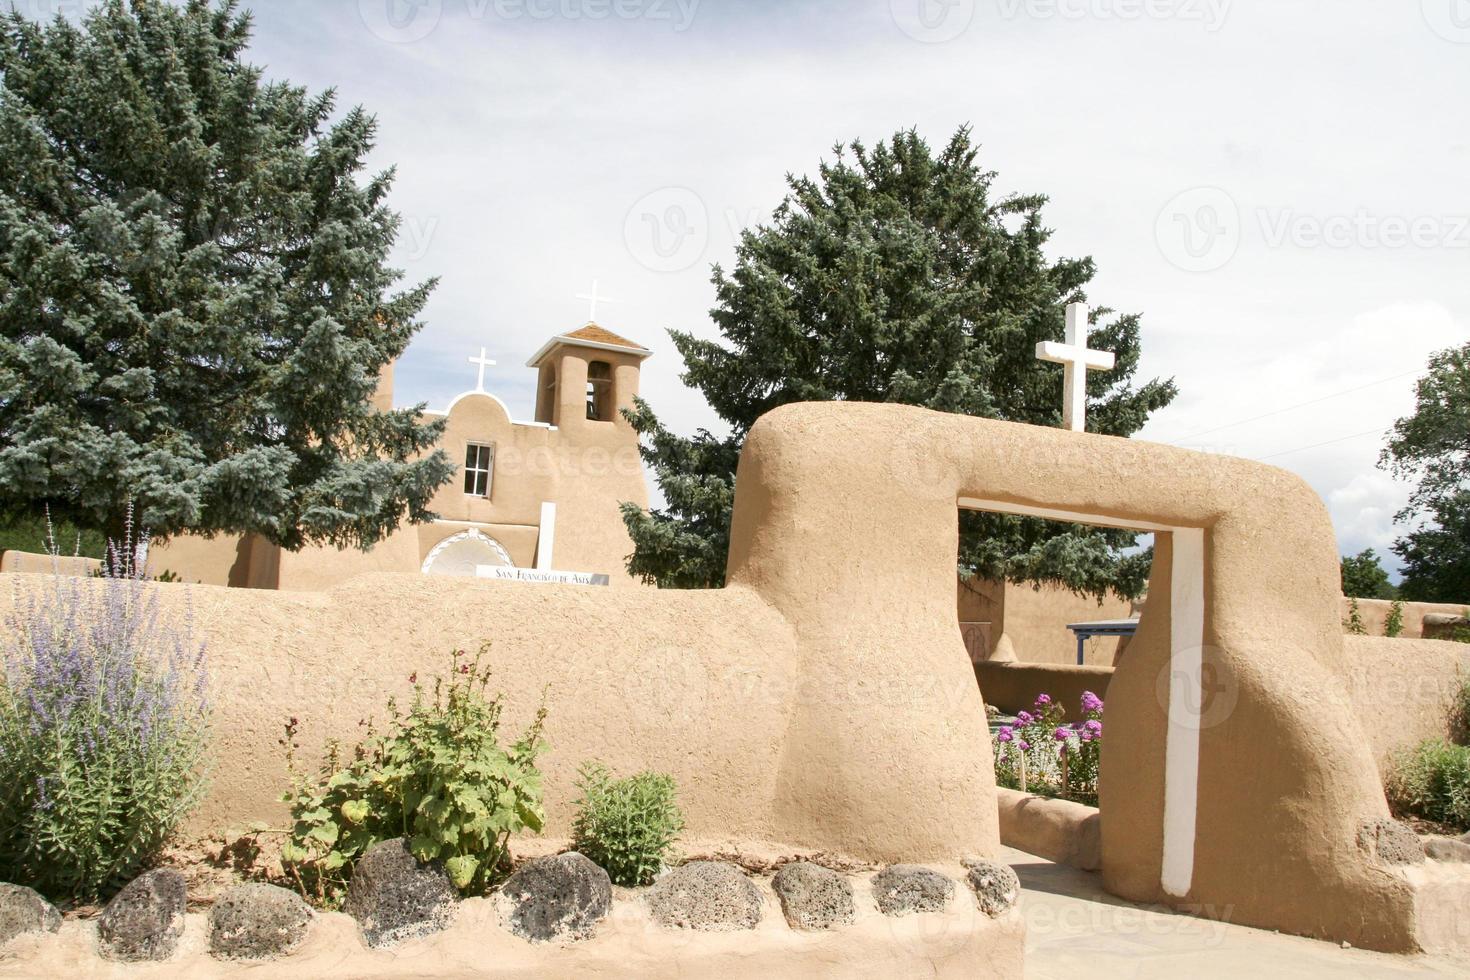 San Francisco de Asis Mission Church in New Mexico photo